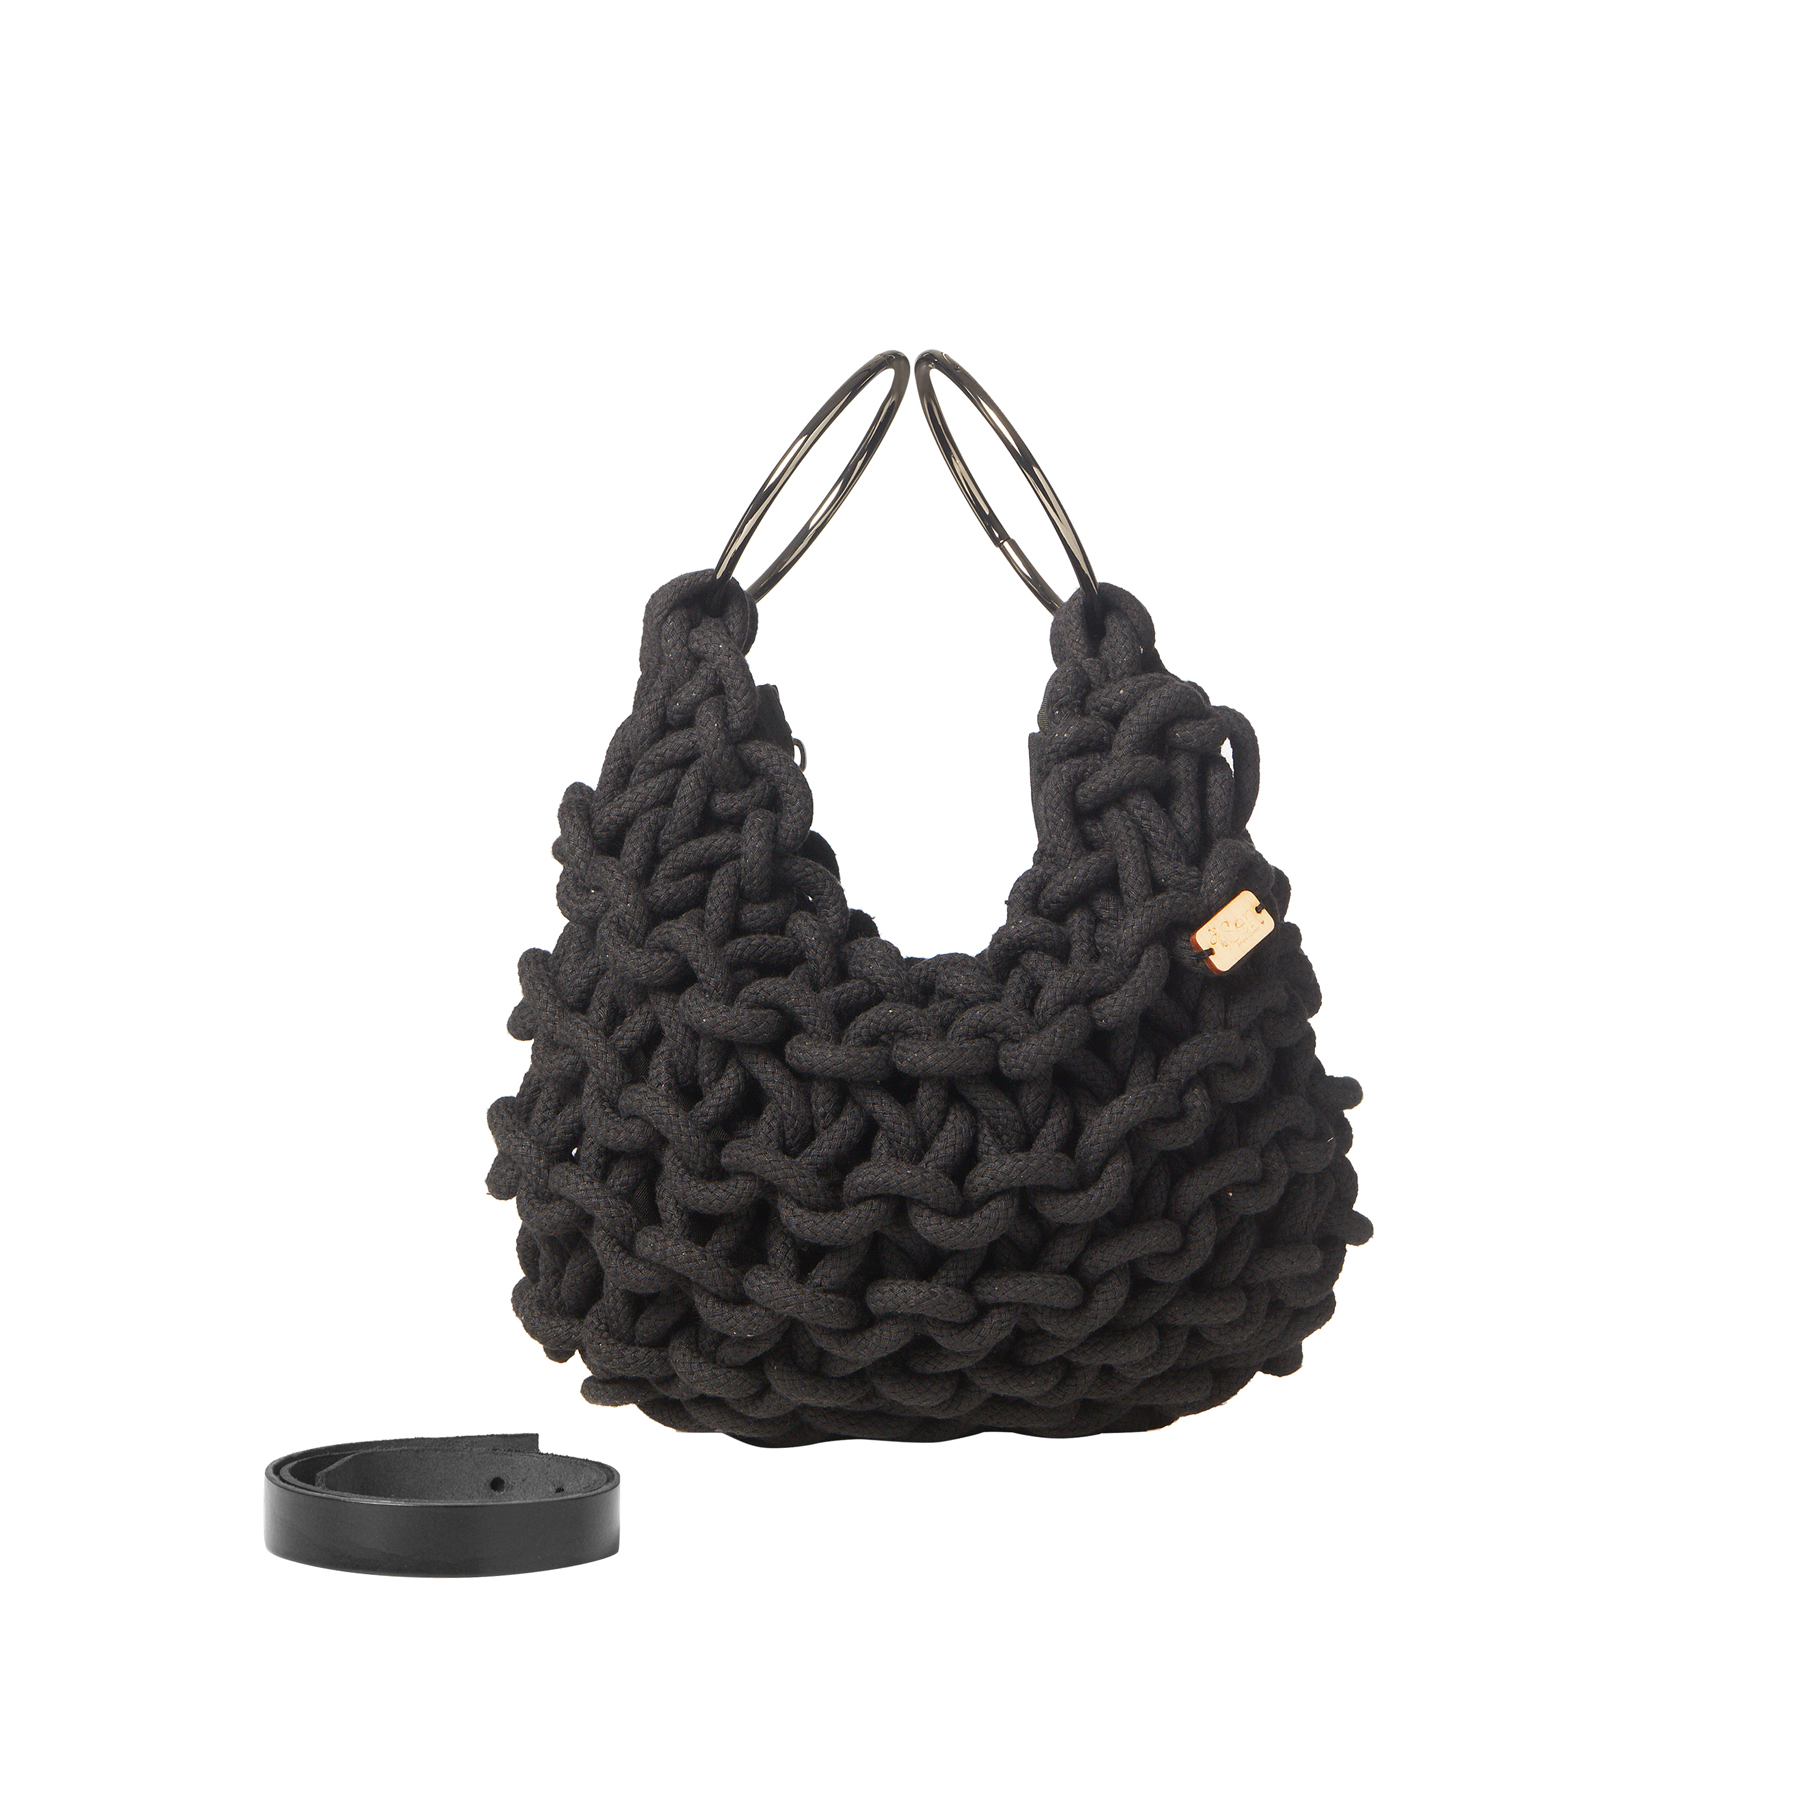 a handmade knitted hobo bag with real leather adjustable strap, in black color